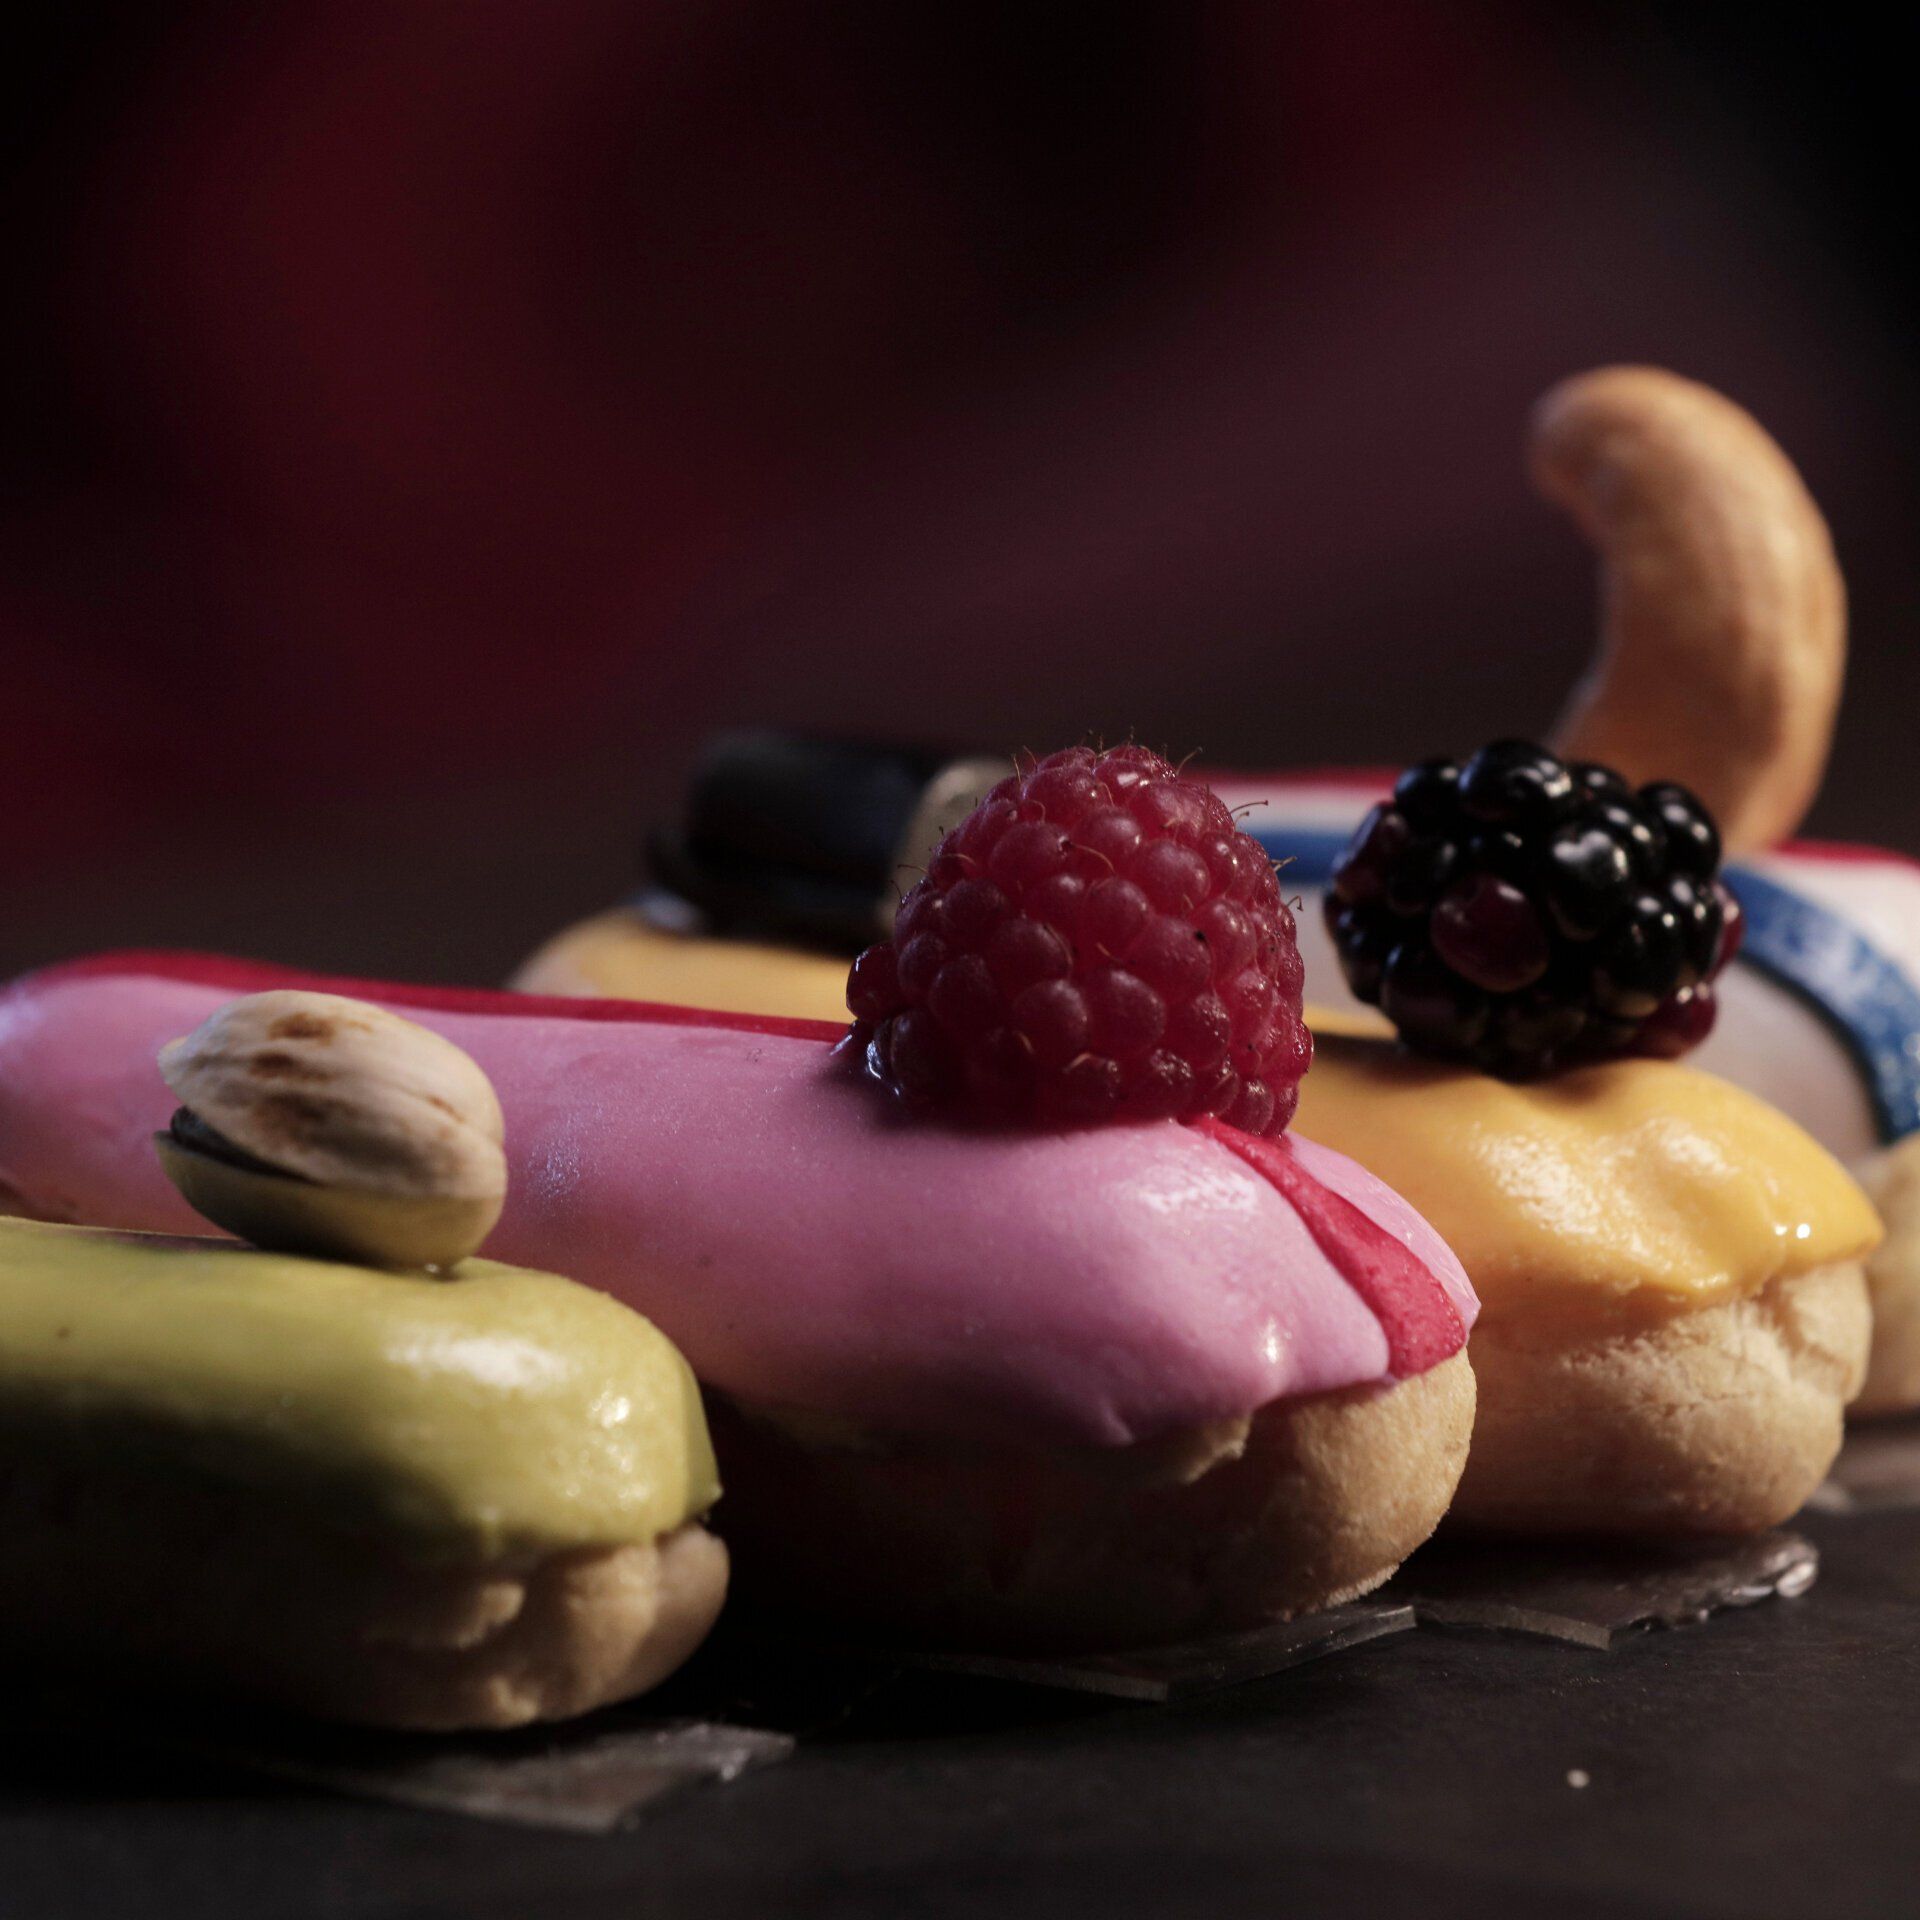 Four eclair treats are set on a table, decorated as race cars with raspberry, blackberry and nuts